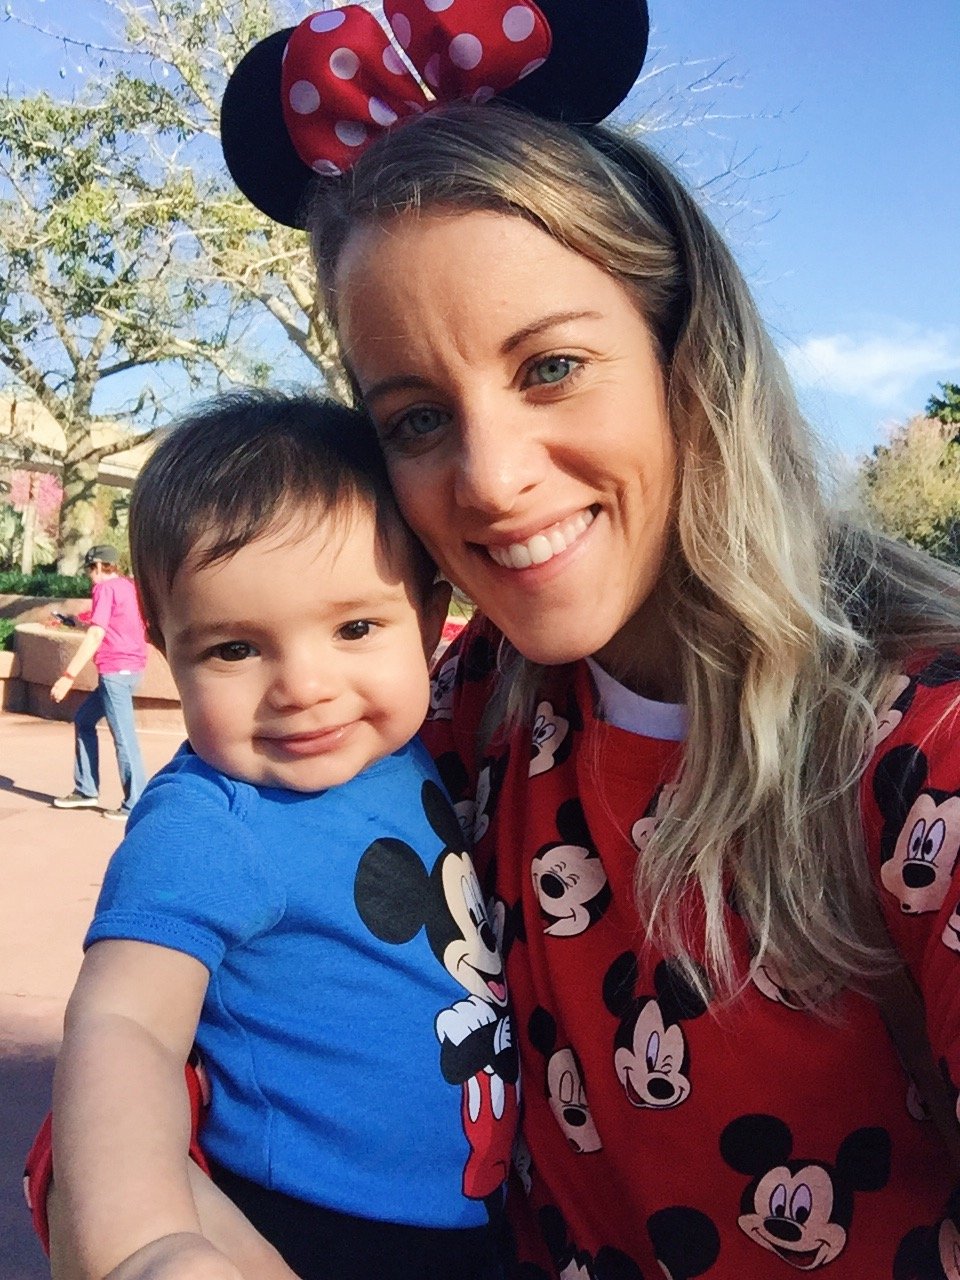 traveling with a baby to disney